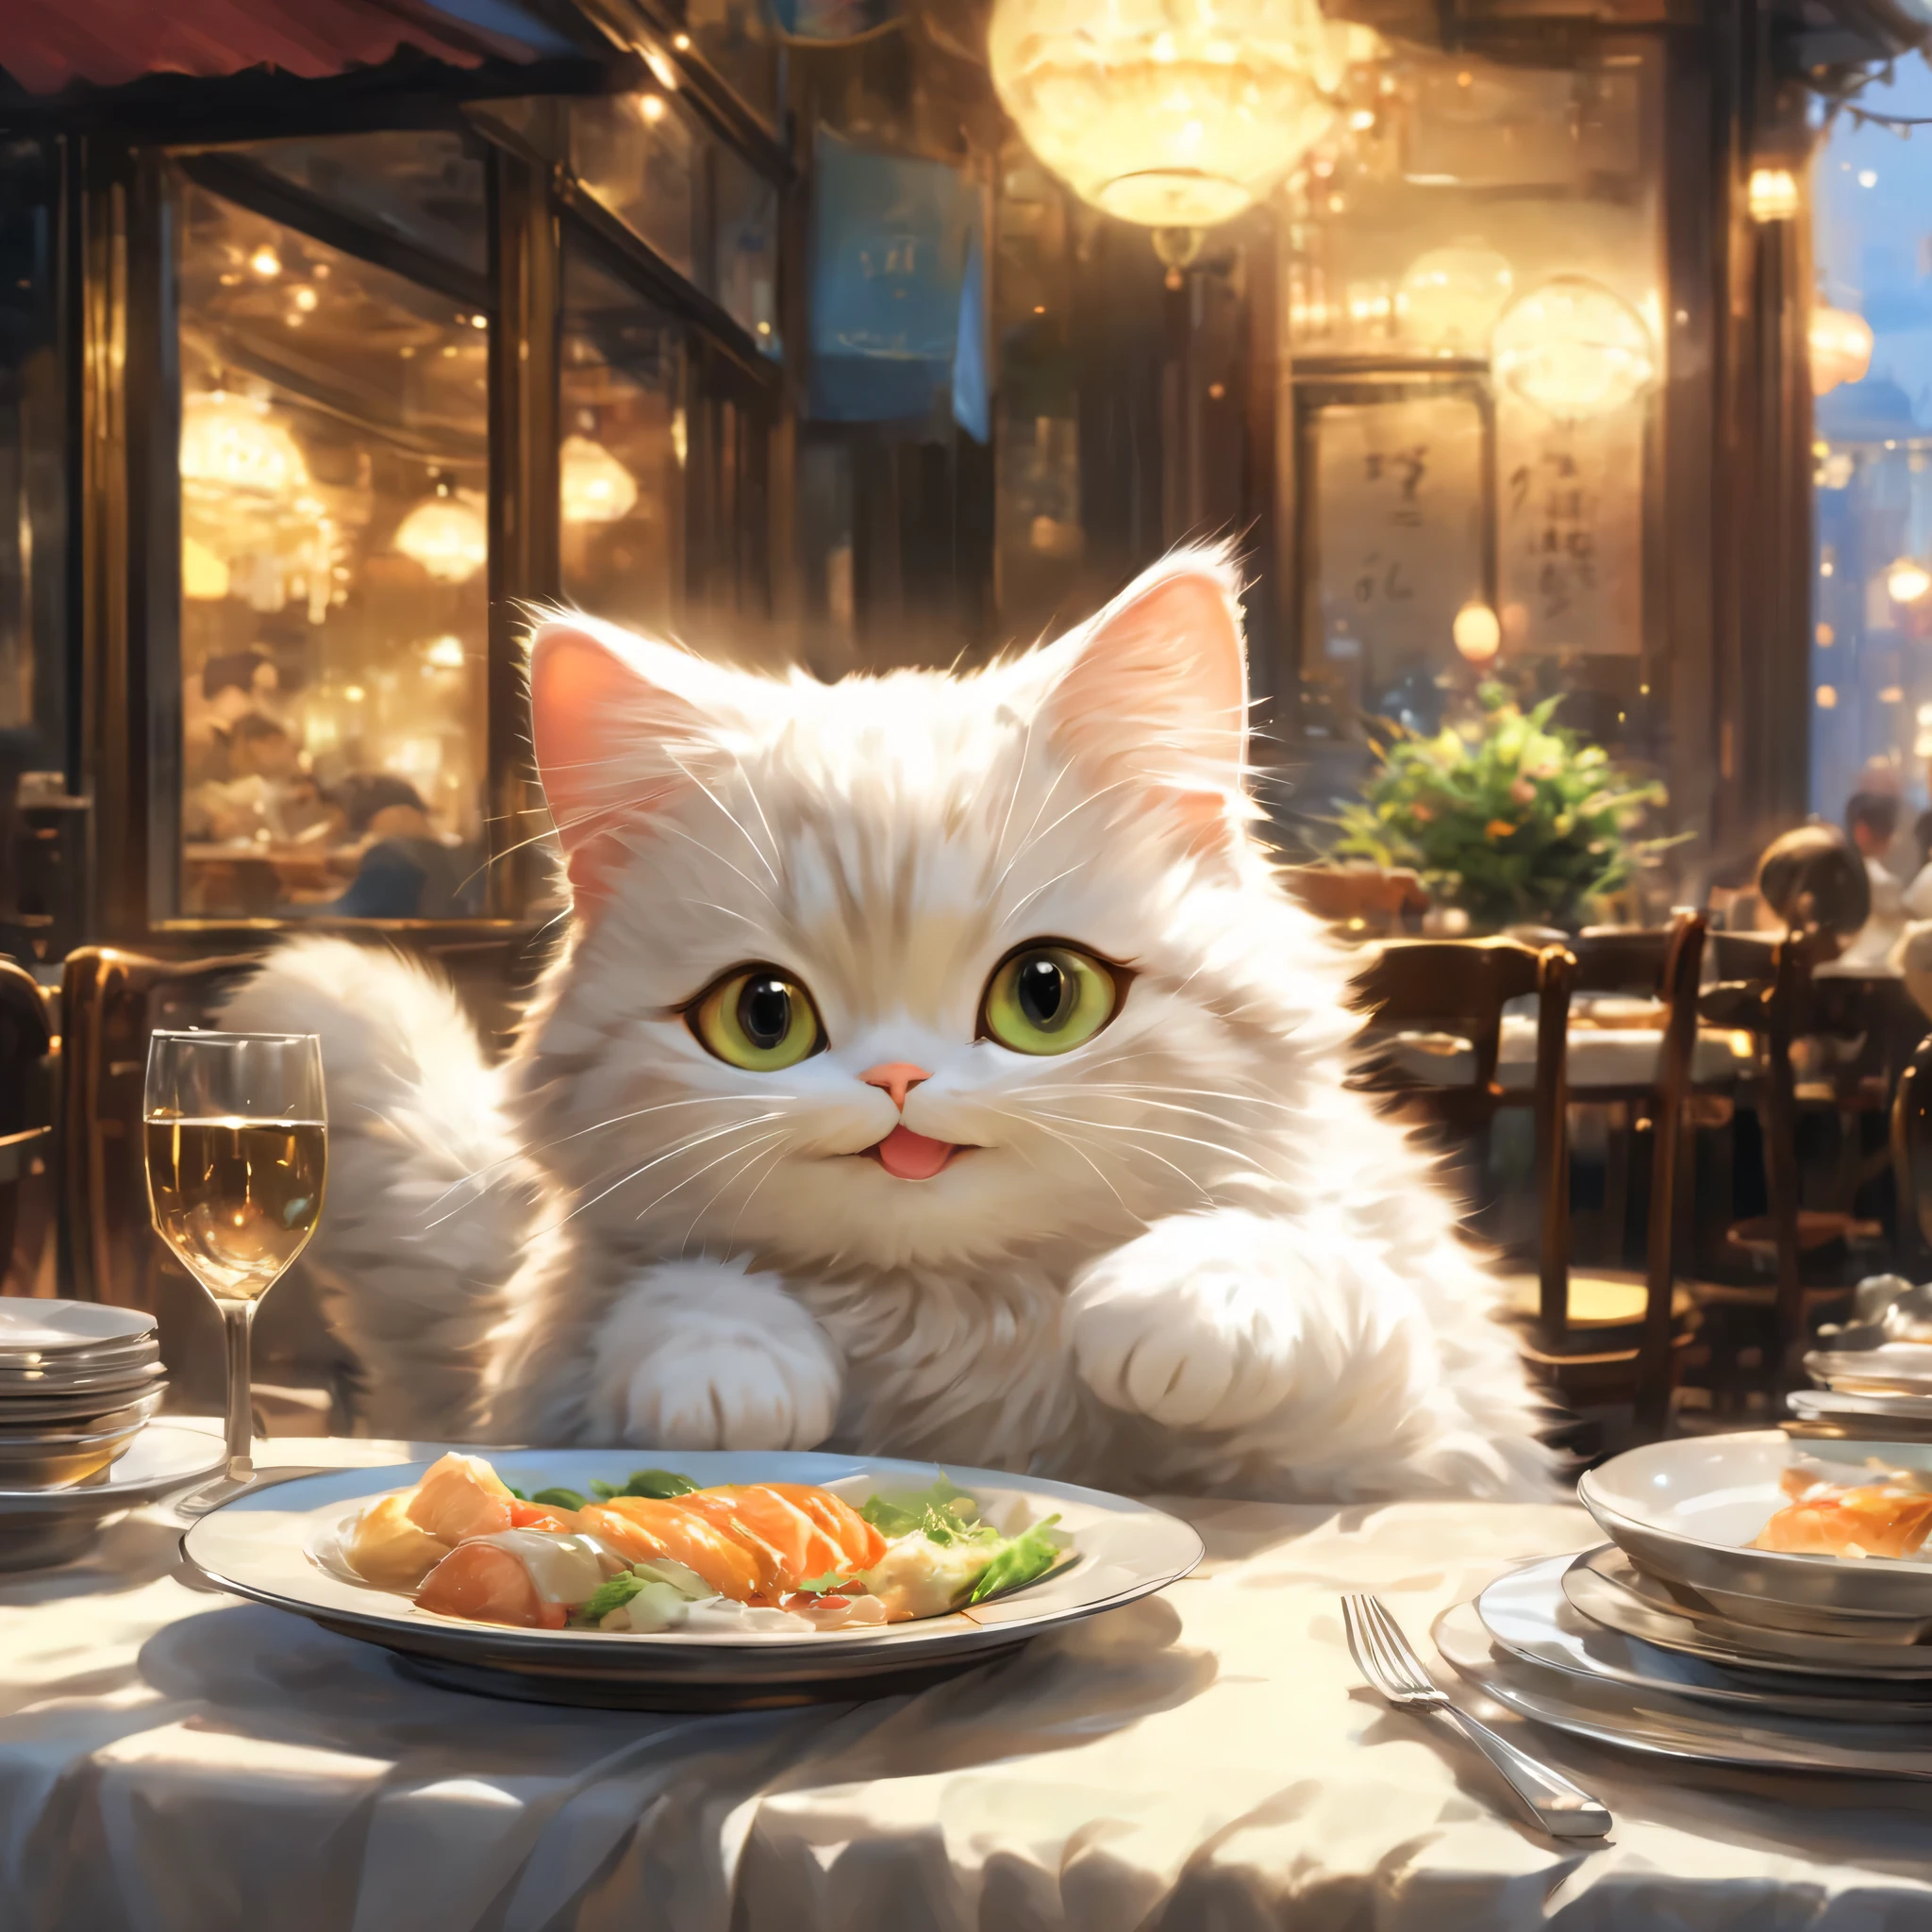 anthropomorphic cat,minuet,bus stop,See timetable,cute,fluffy fur,masterpiece,rich colors,highest quality,official art,fantasy,colorful,Happy,smile,最高にcute猫,fluffy cat,I&#39;m looking forward to,happiness,nice background,stylish cityscape,fun outing,fun waiting time,Sparkling,beautiful light and shadow,